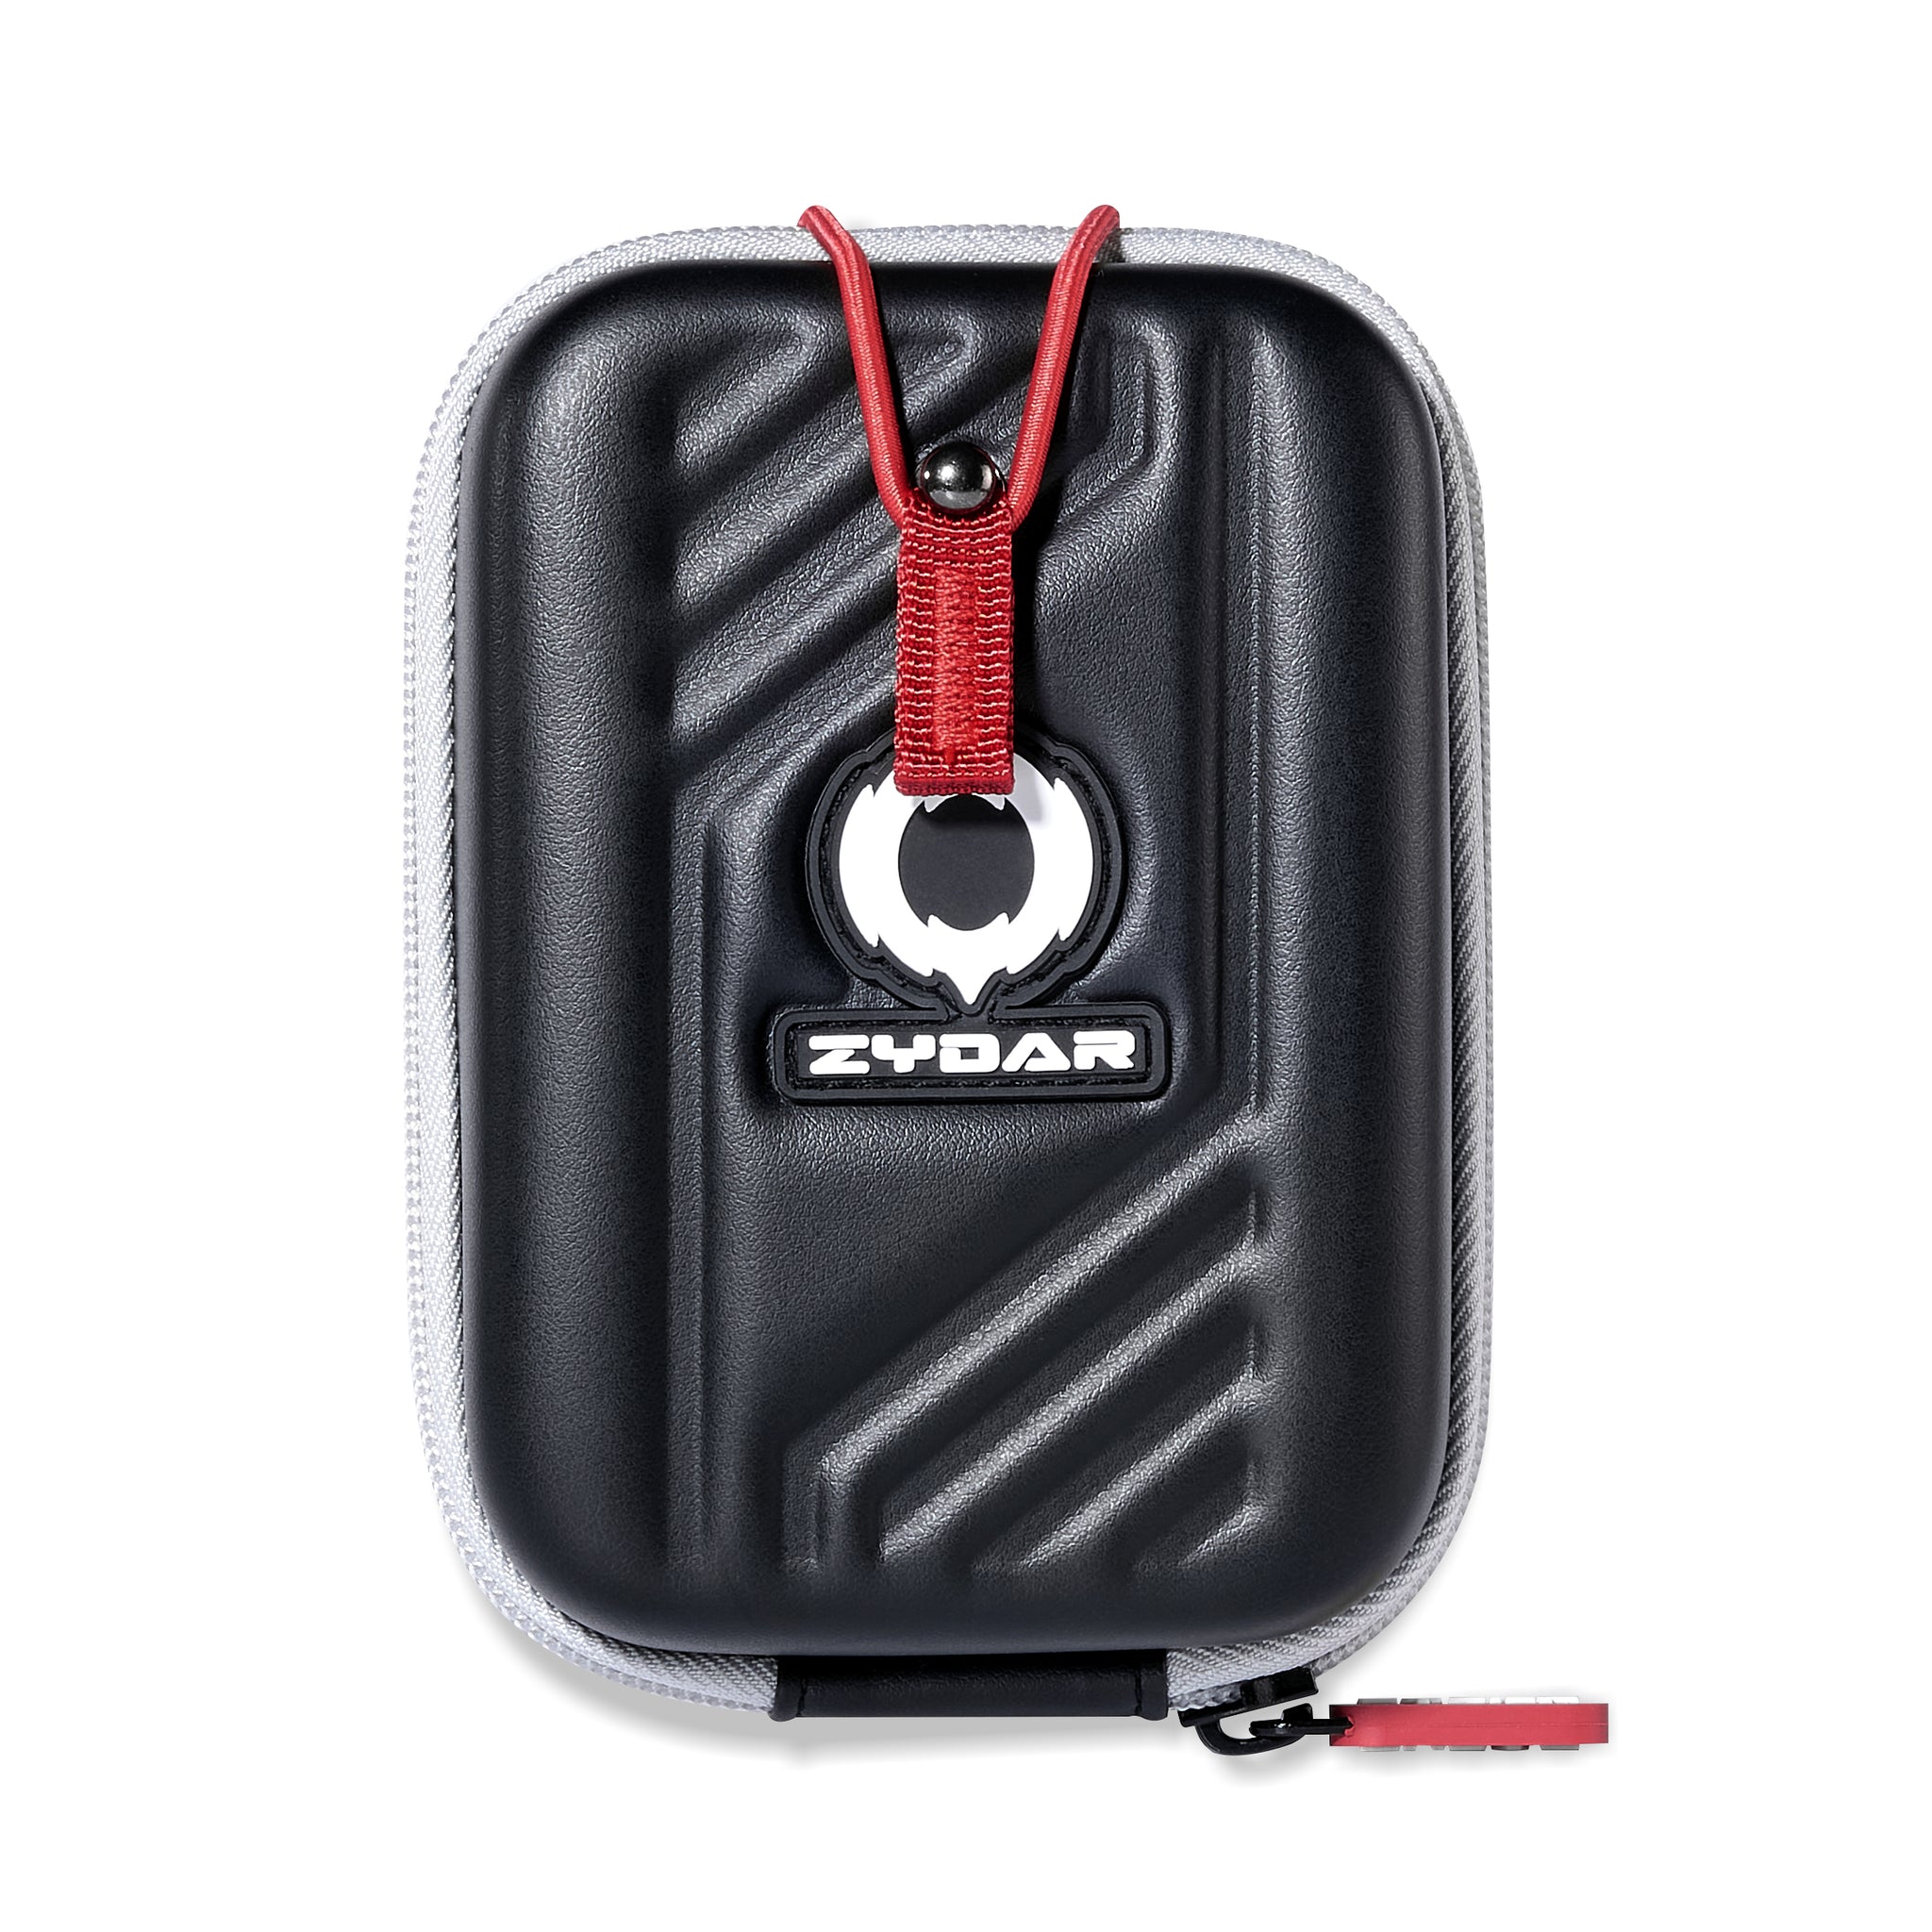 Carrying Case Black-Red